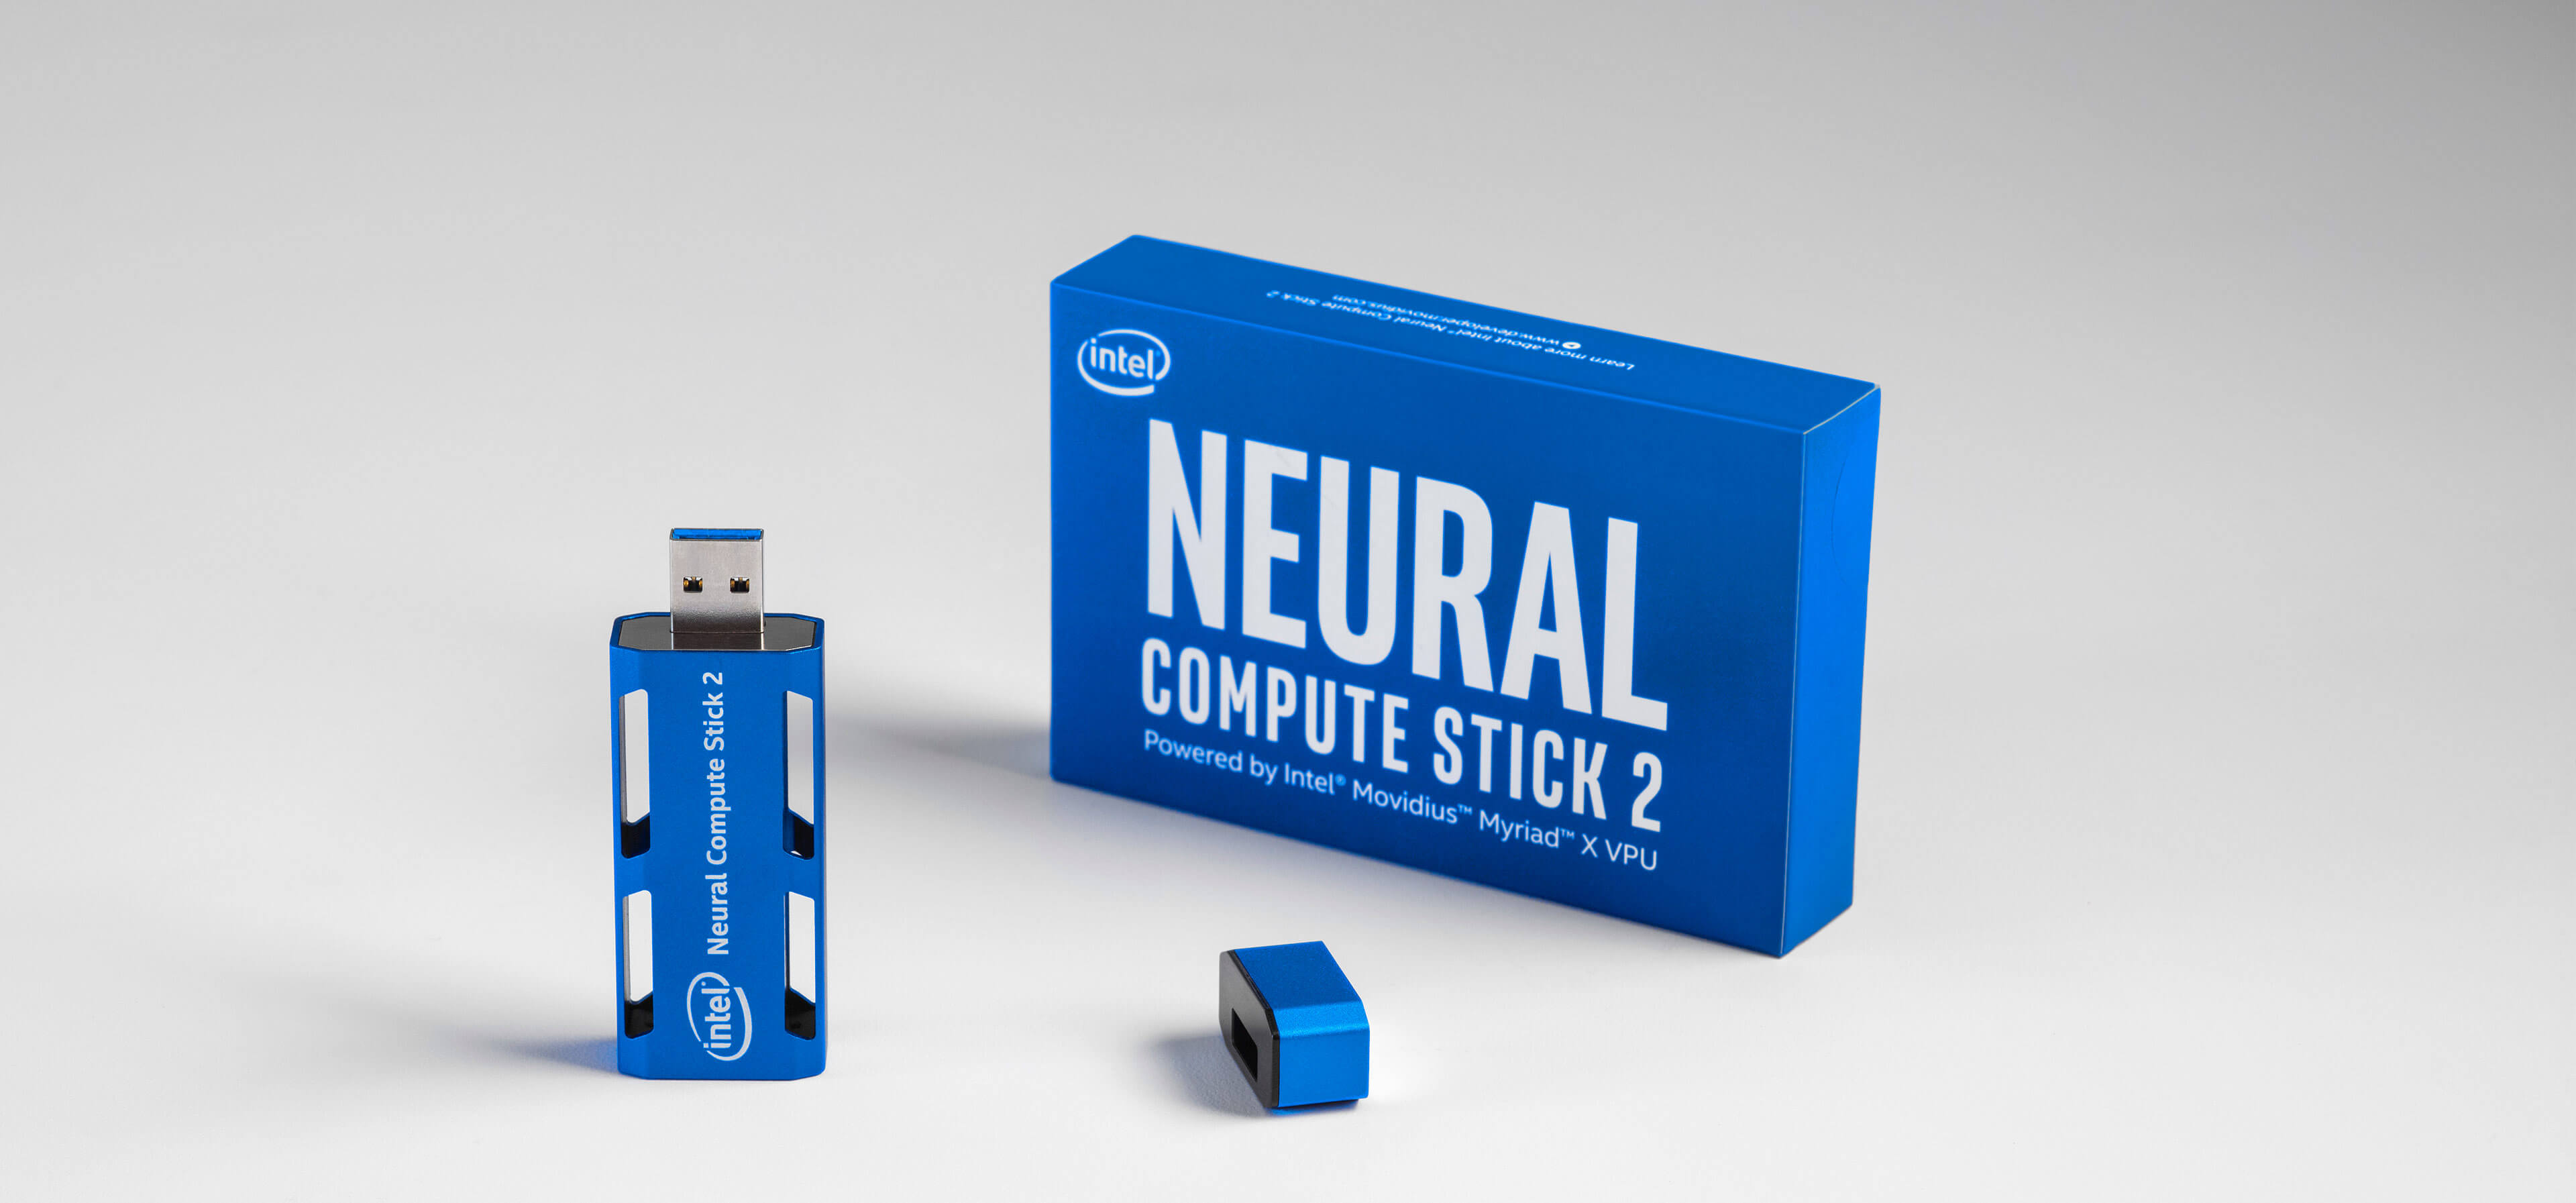 Intel announces the Neural Compute Stick 2 for deep learning acceleration